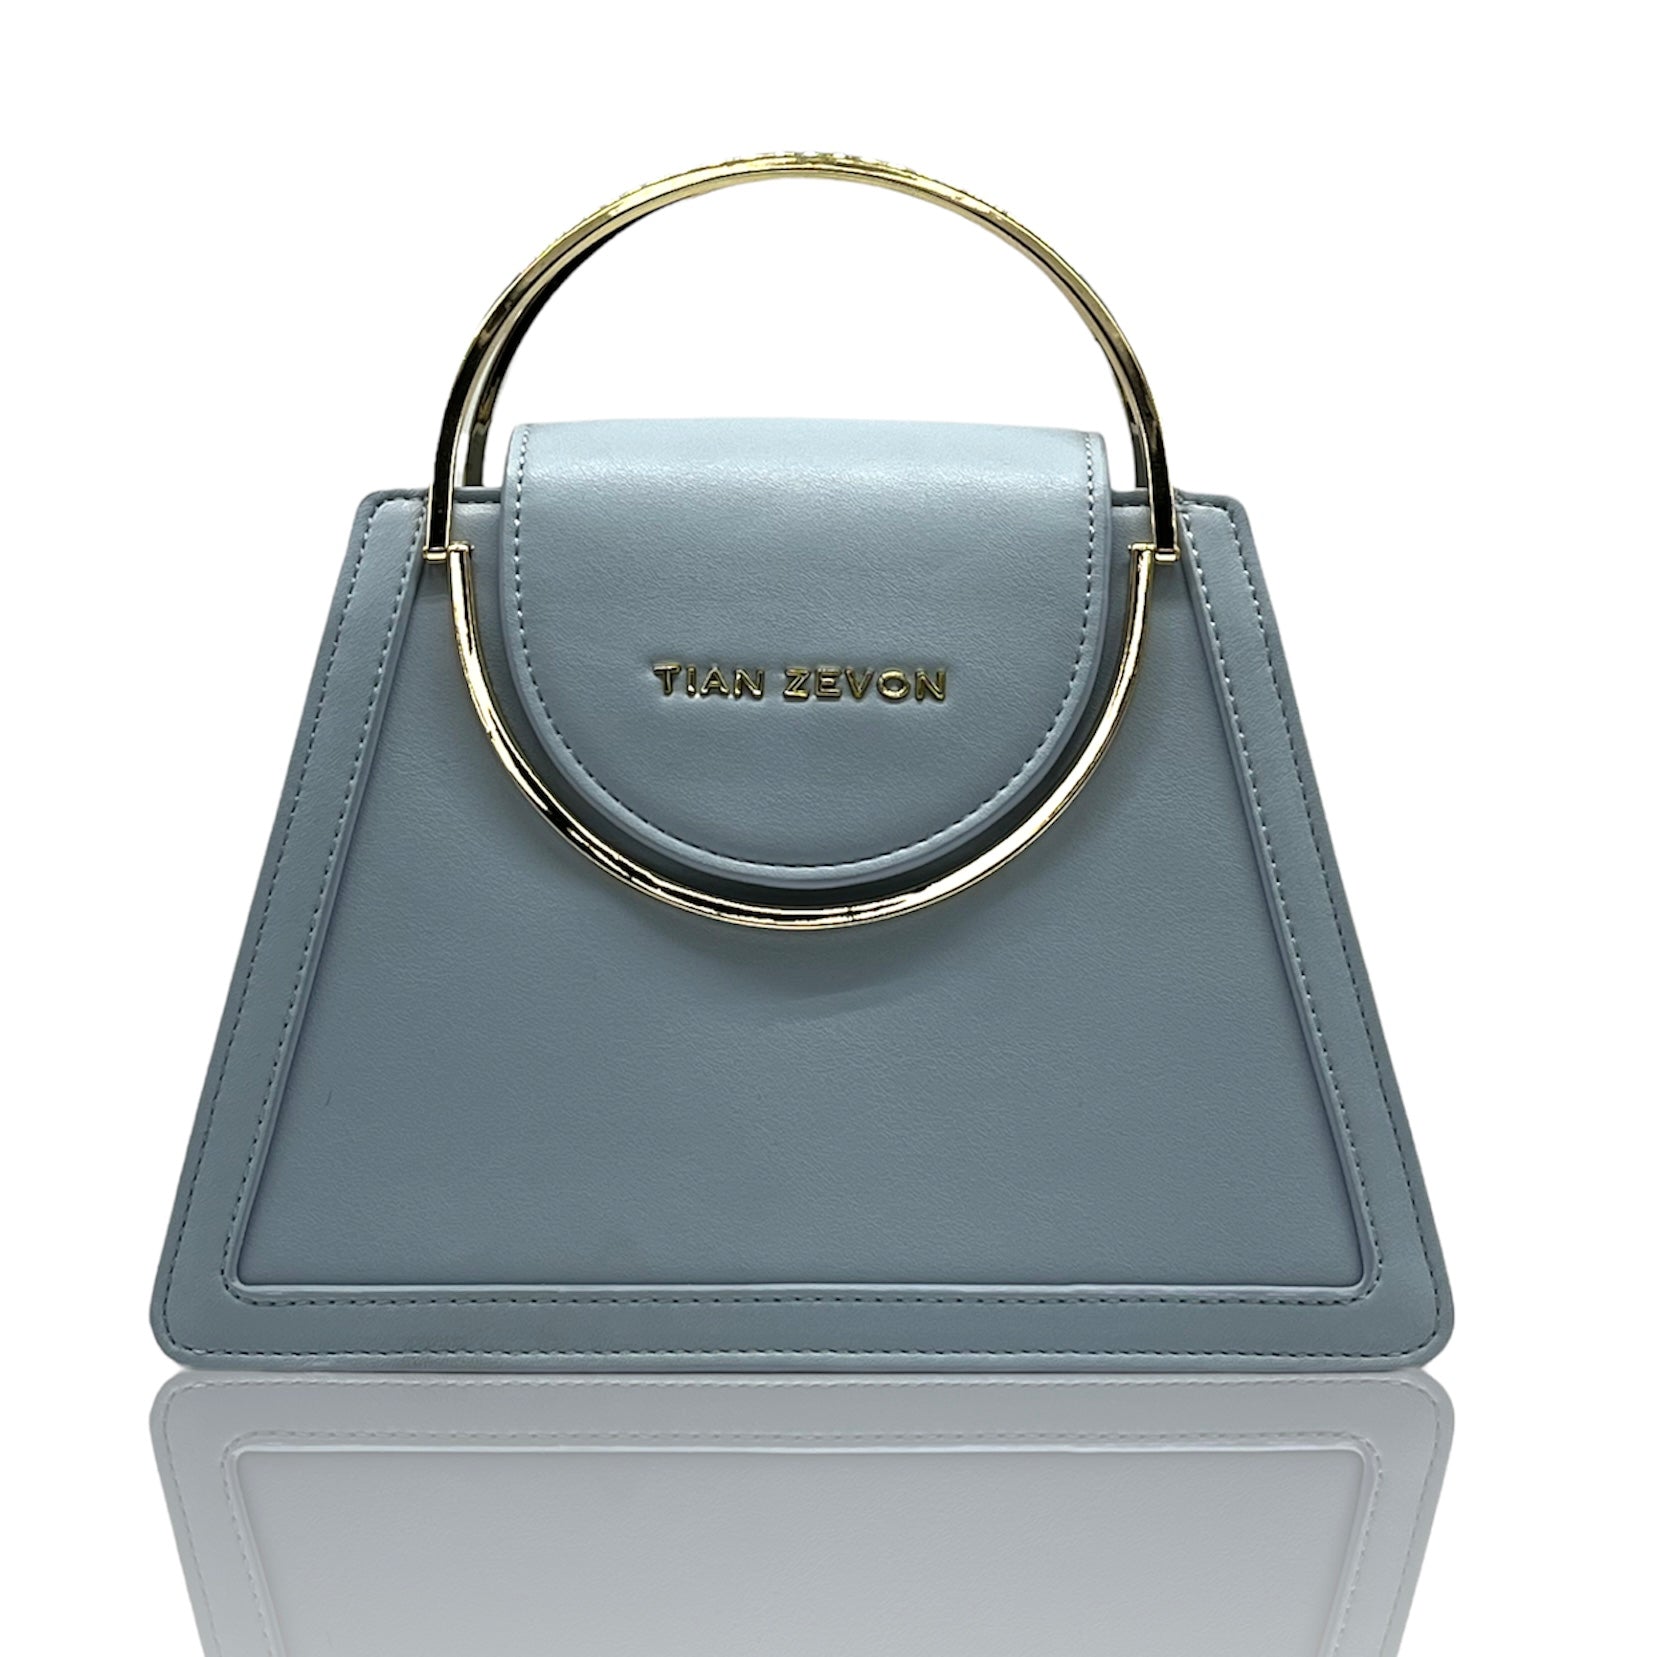 GISSELLE leather top handle bag - artic blue